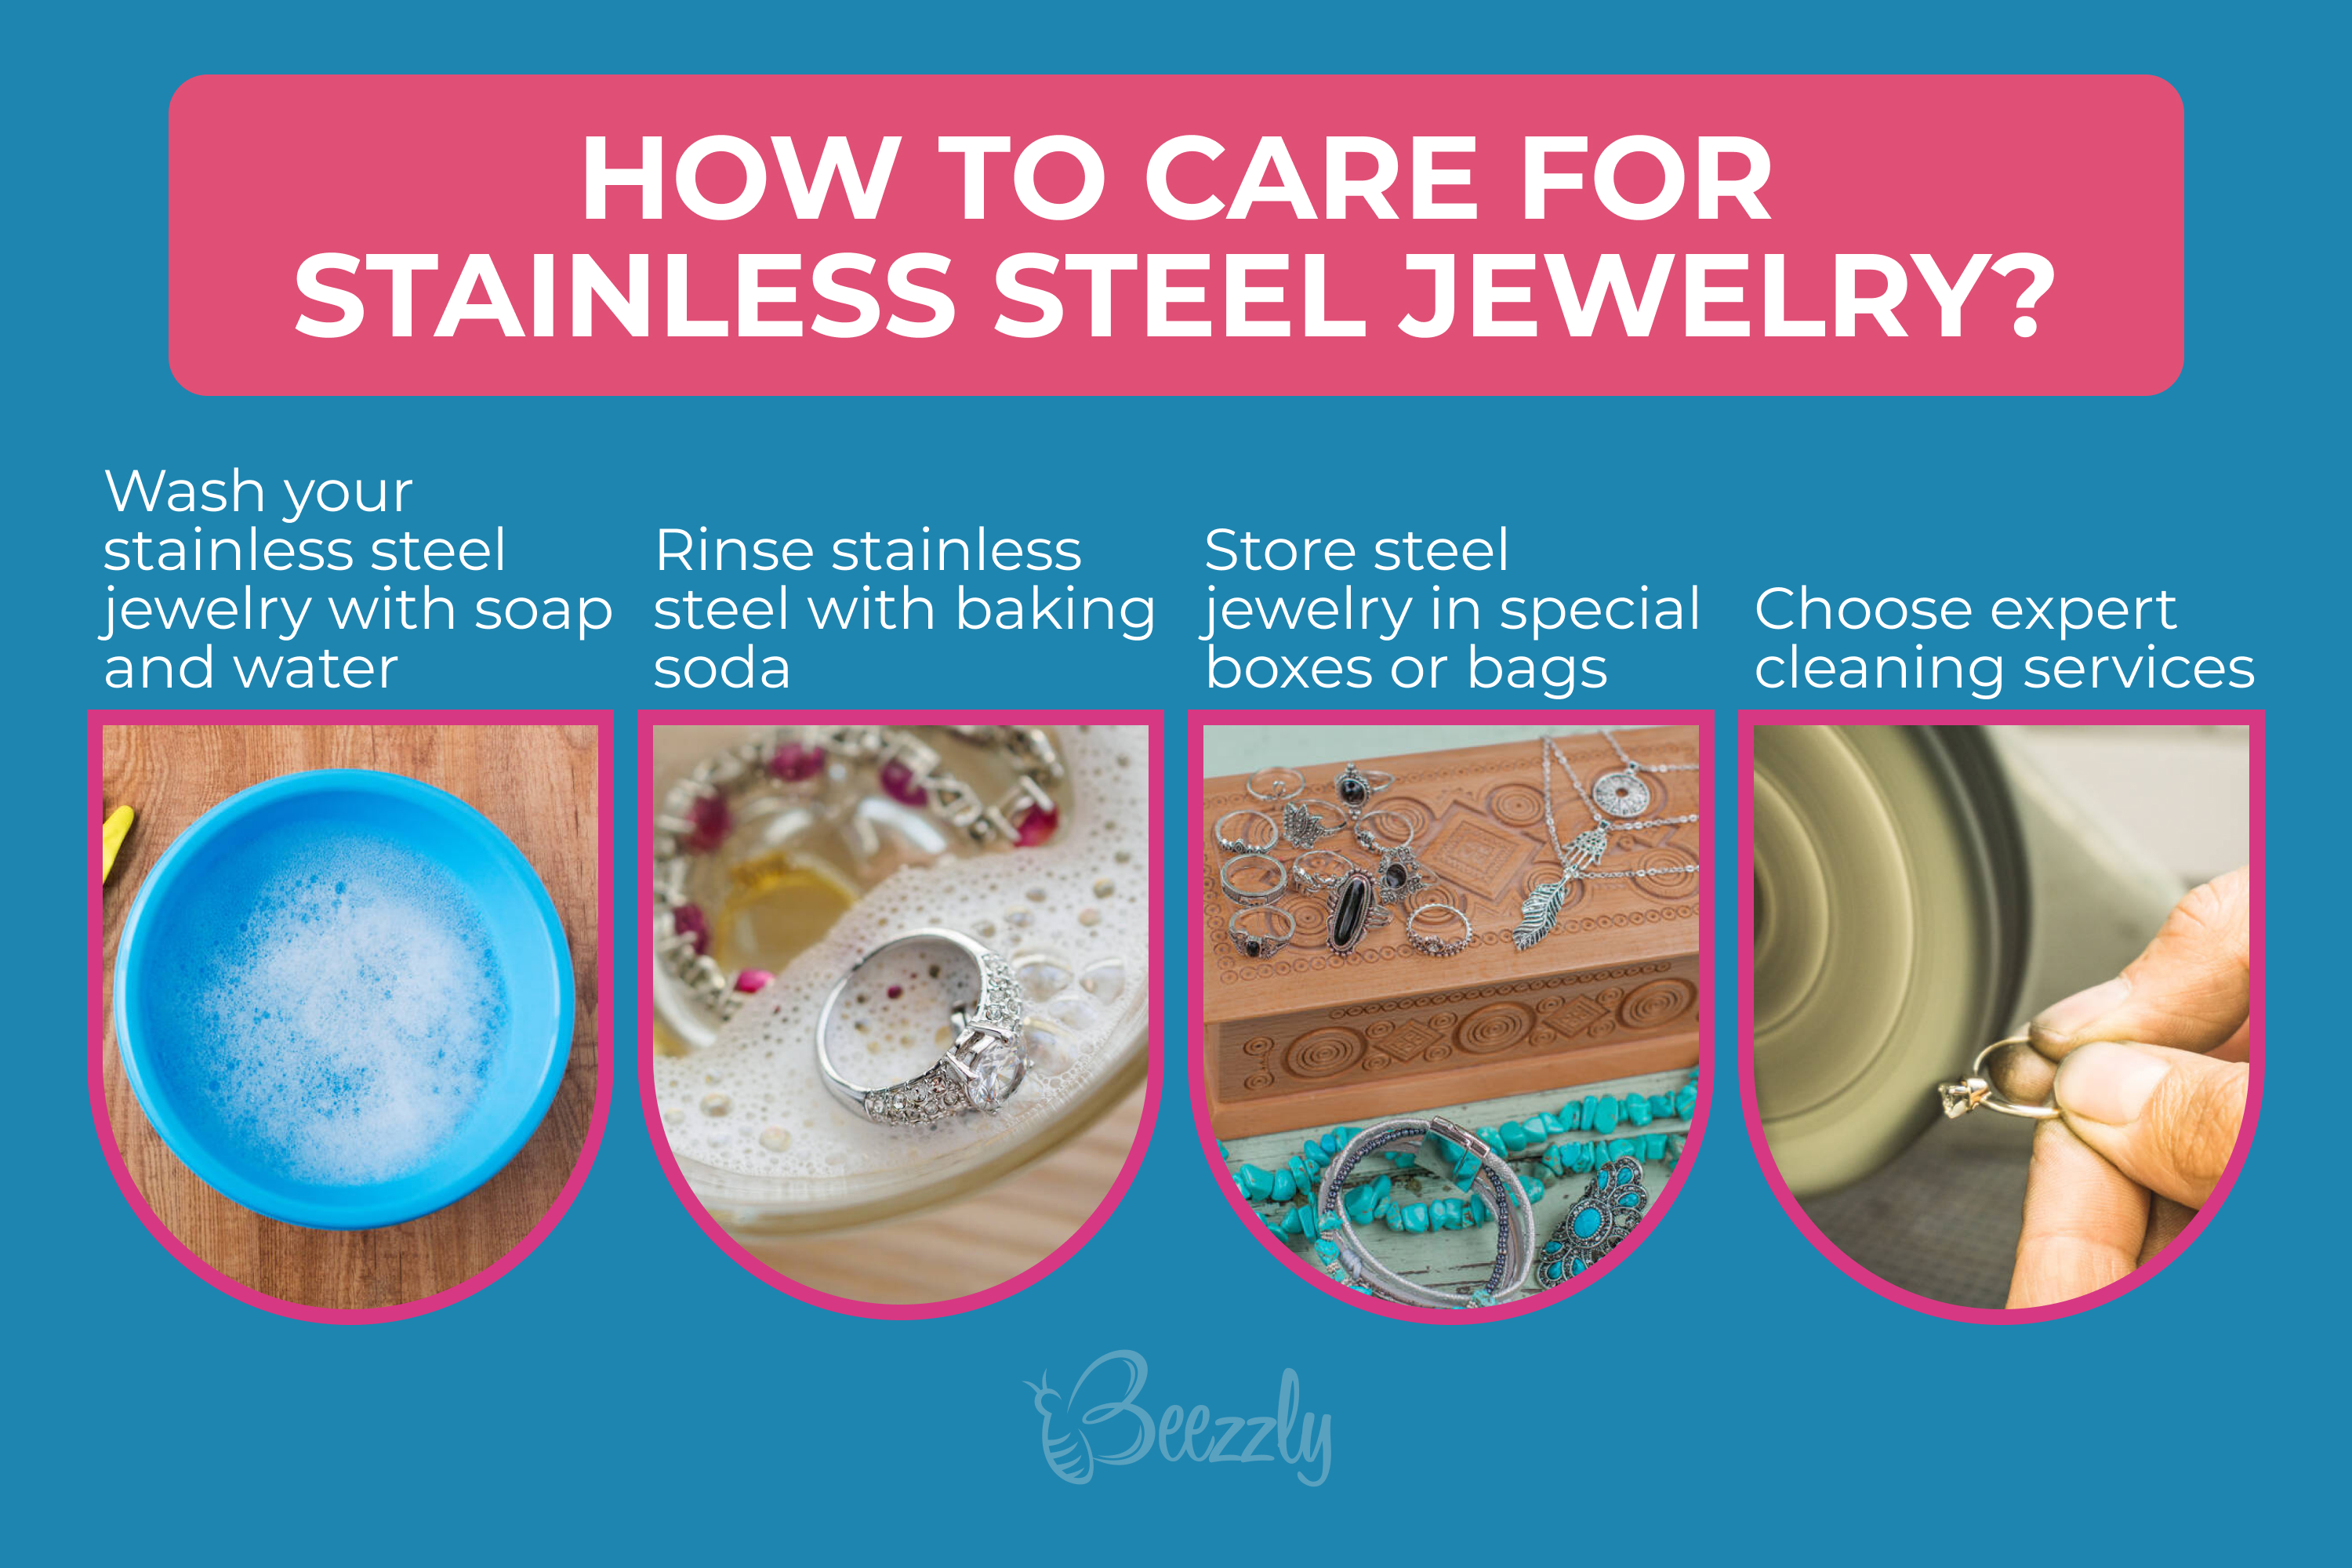 How to care for stainless steel jewelry